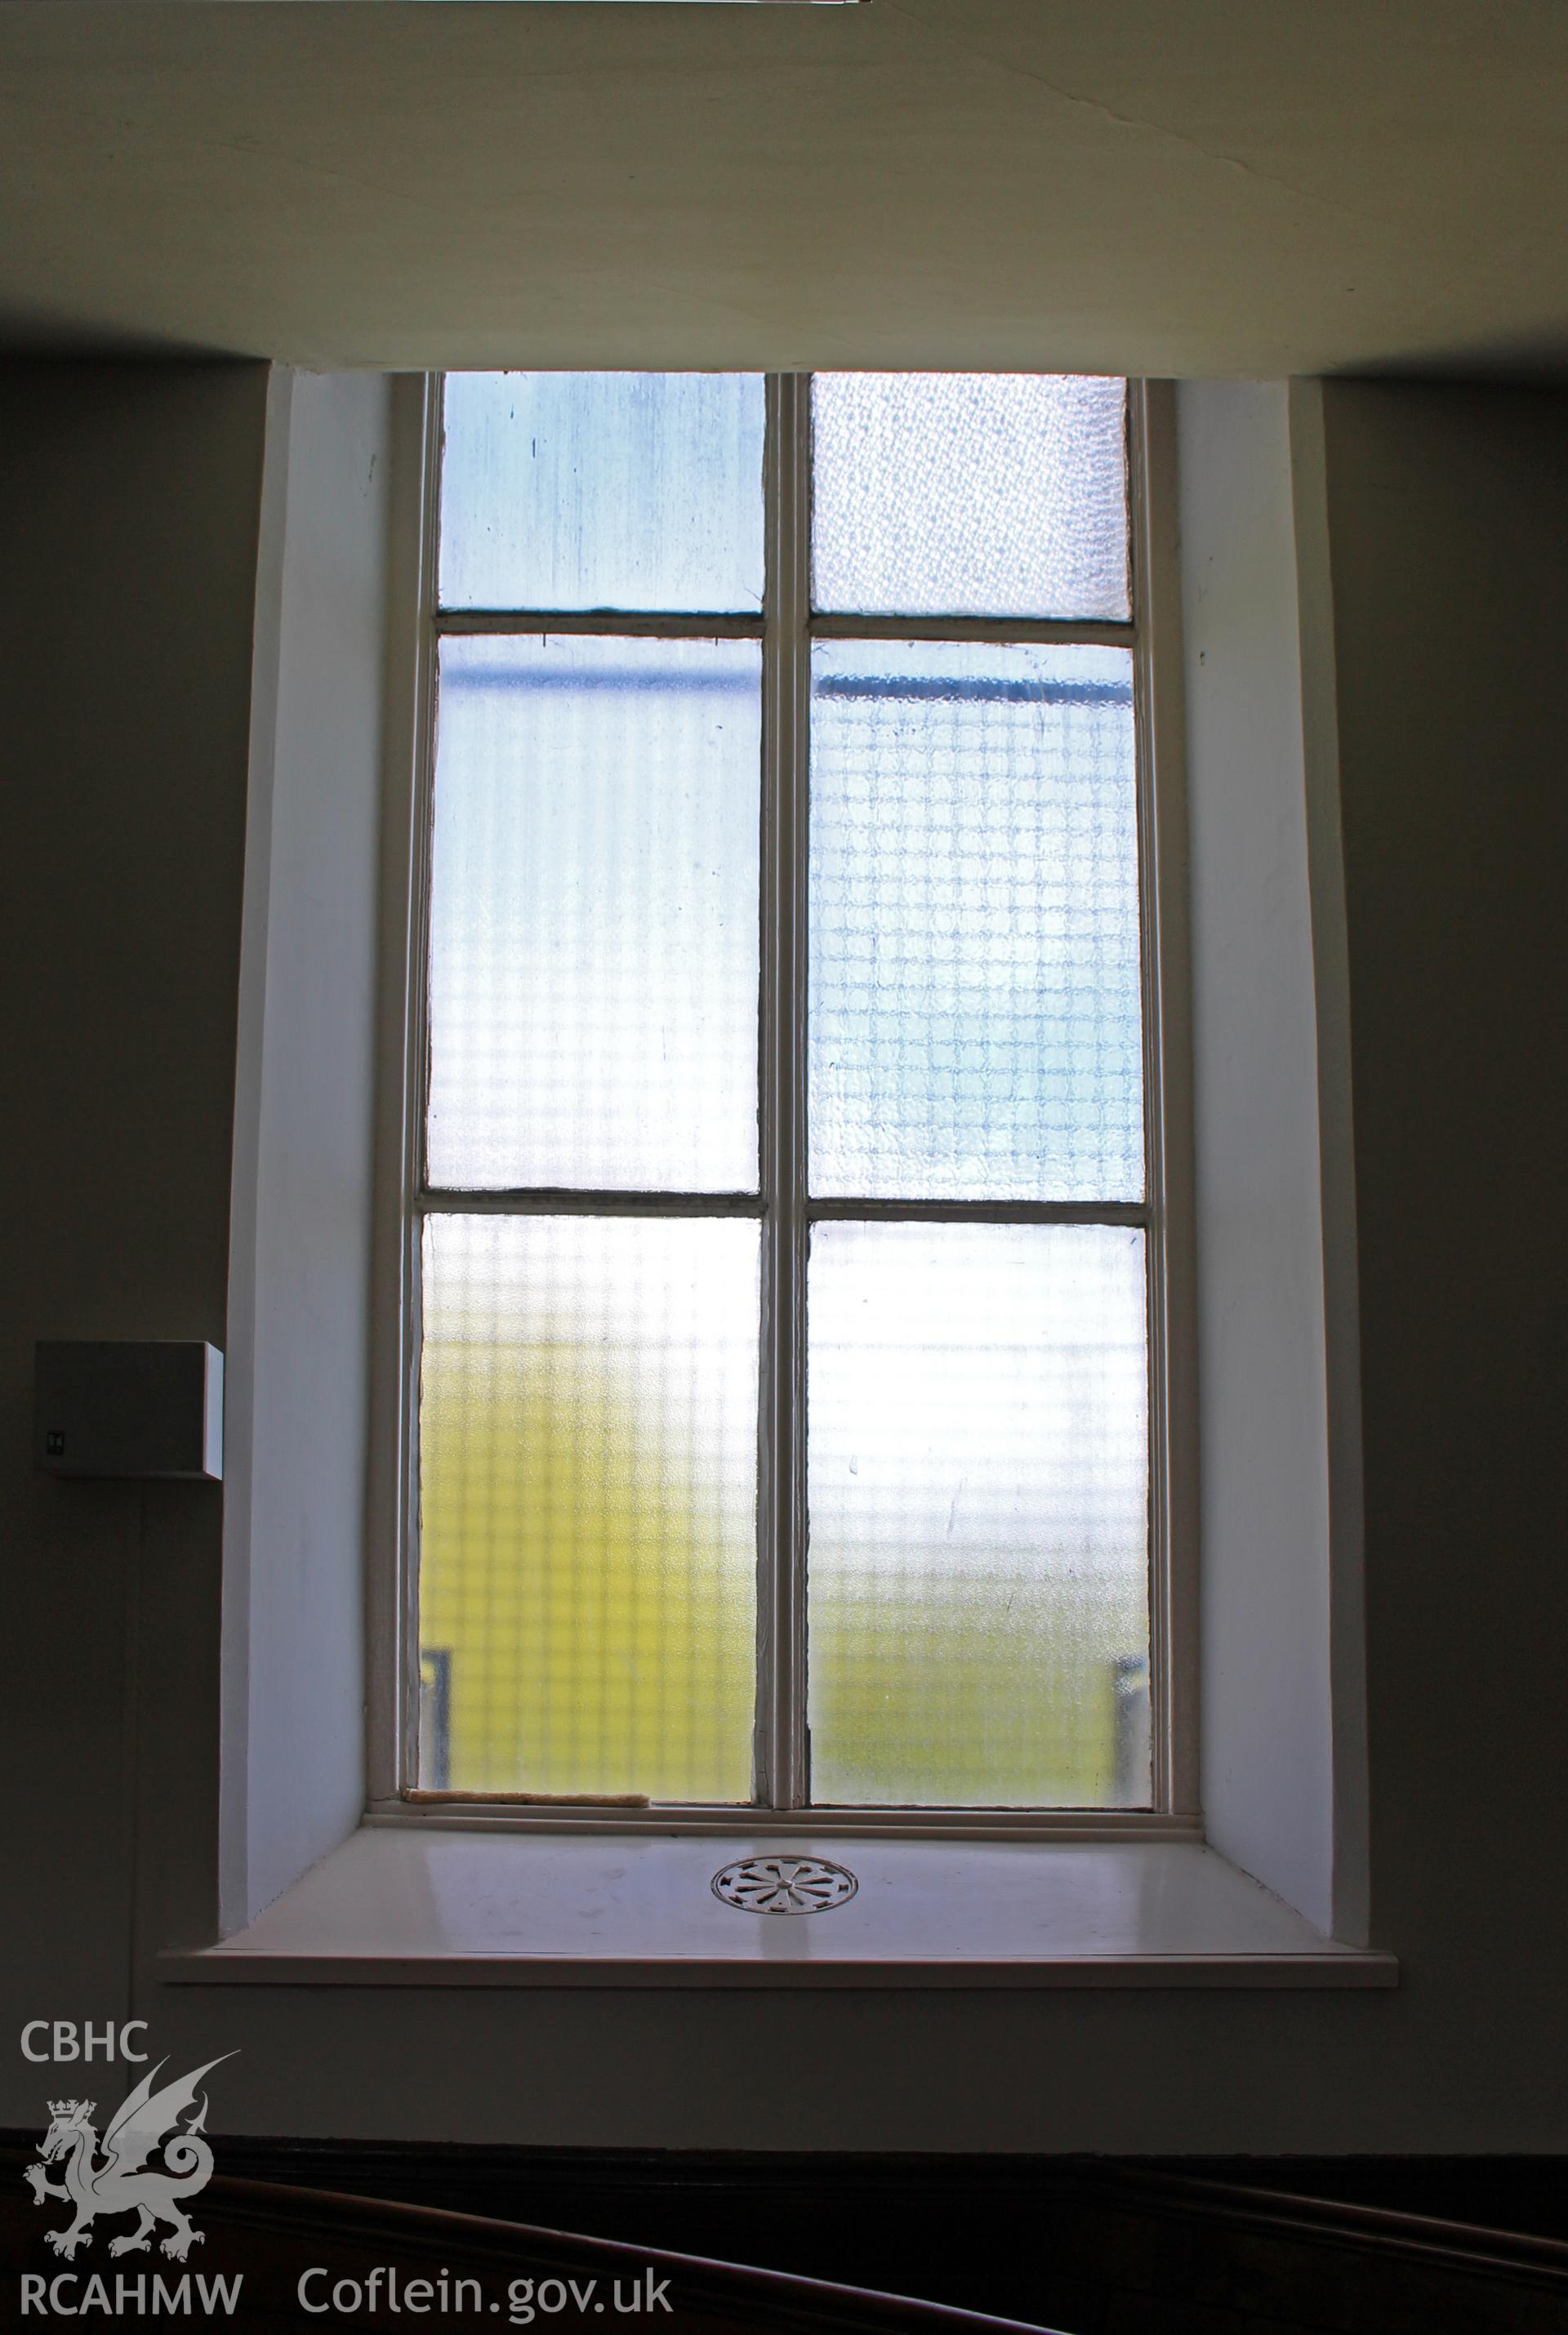 Interior view of window. Photographic survey of Seion Welsh Baptist Chapel, Morriston, conducted by Sue Fielding on 13th May 2017.